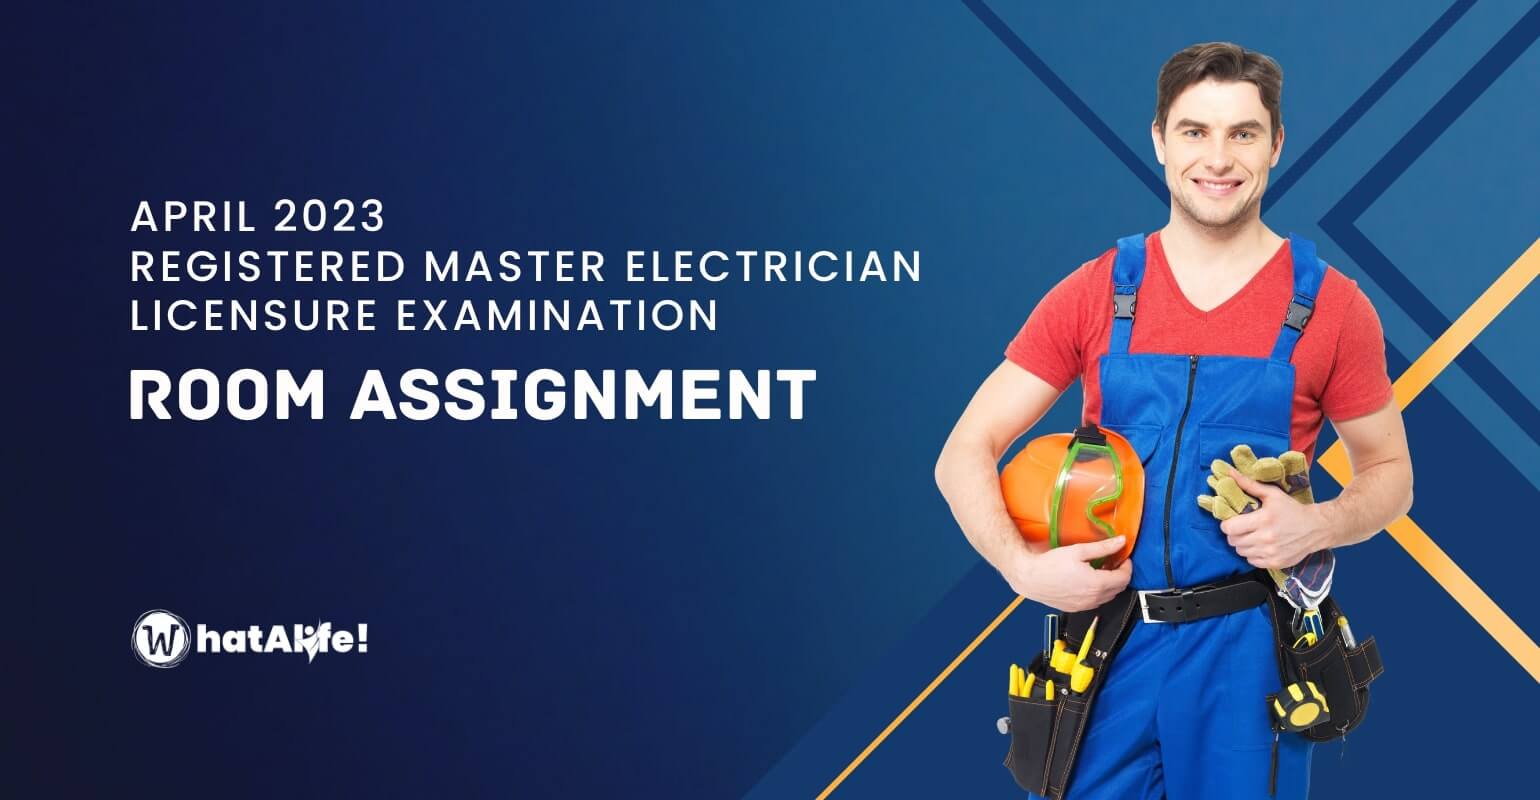 Room Assignment —  April 2023 Registered Master Electricians Licensure Exam